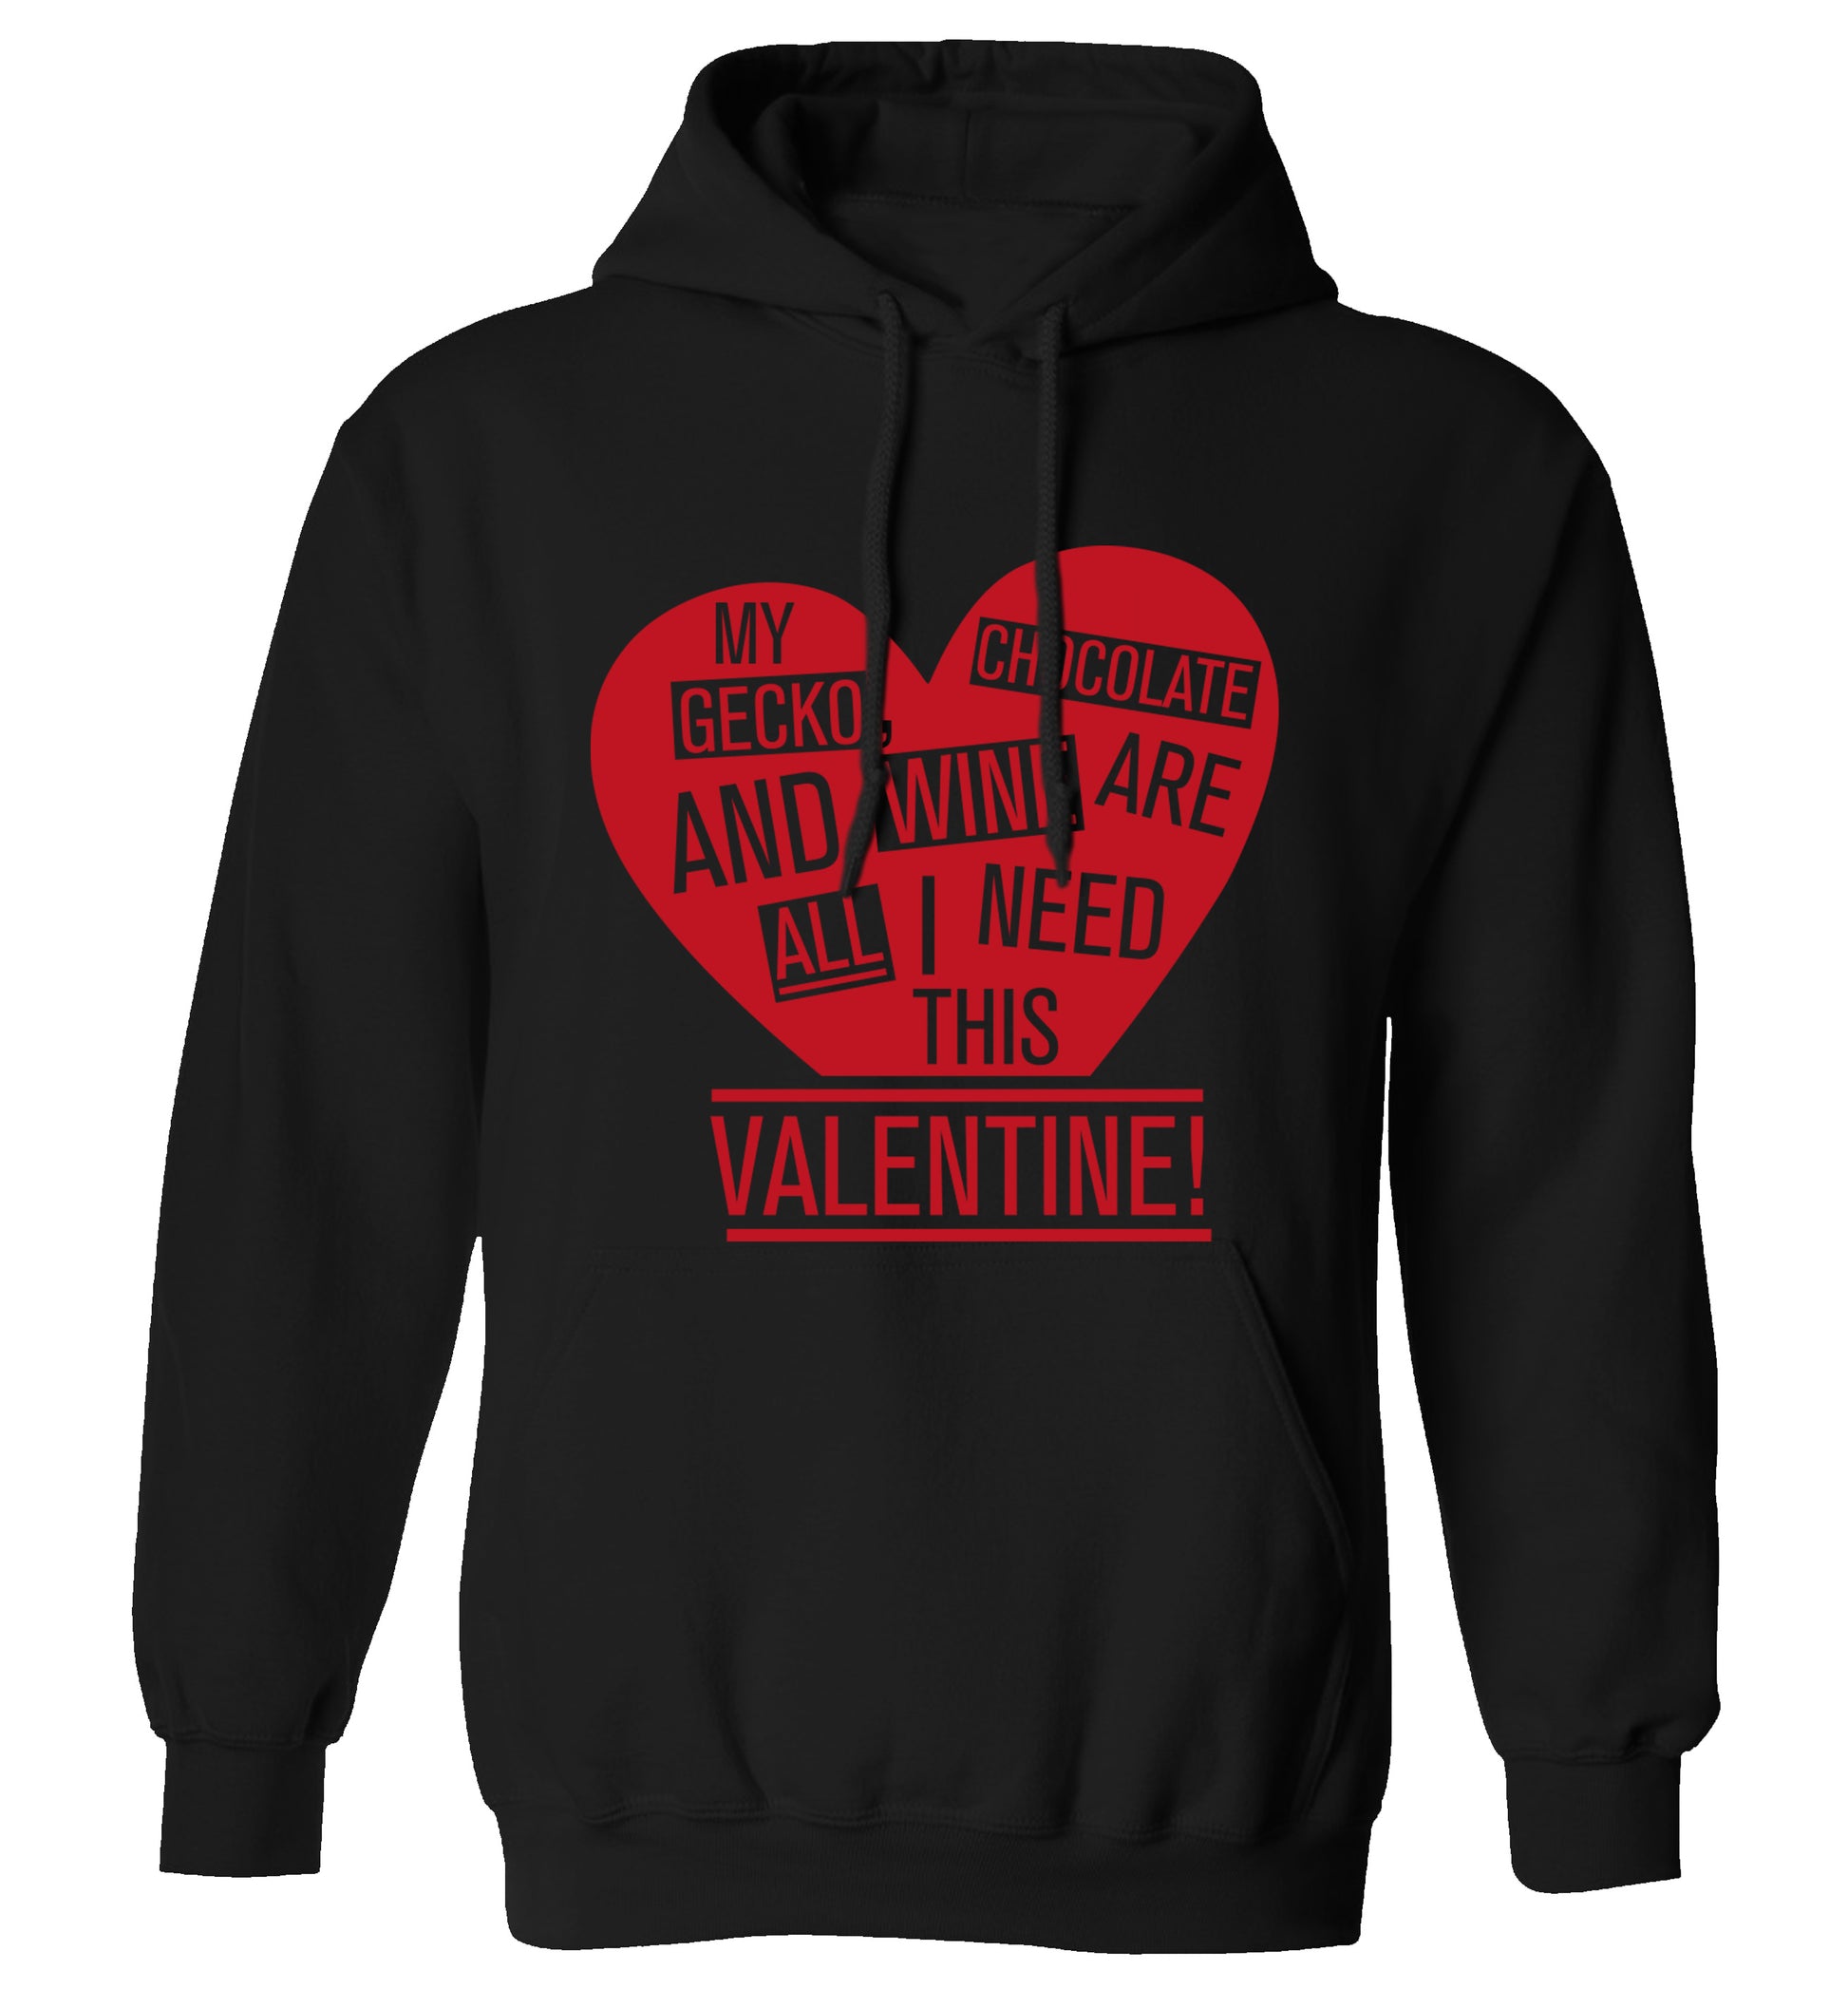 My gecko, chocolate and wine are all I need this valentine! adults unisex black hoodie 2XL